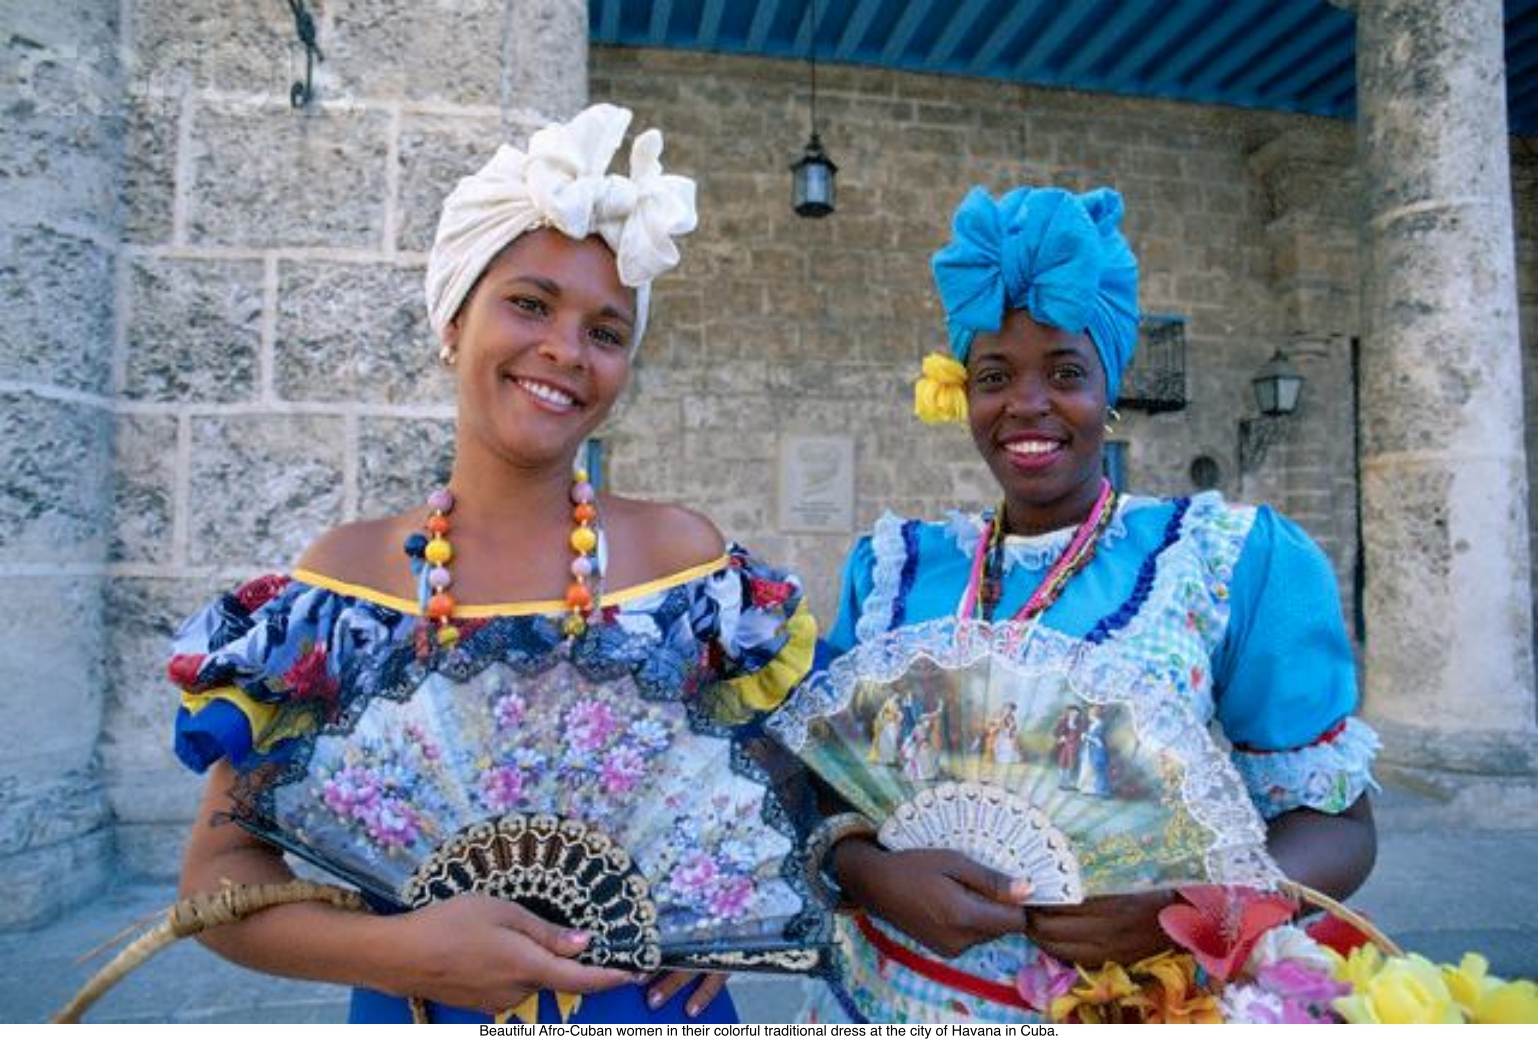 Beautiful Afro-Cuban women in their colorful traditional dress at the